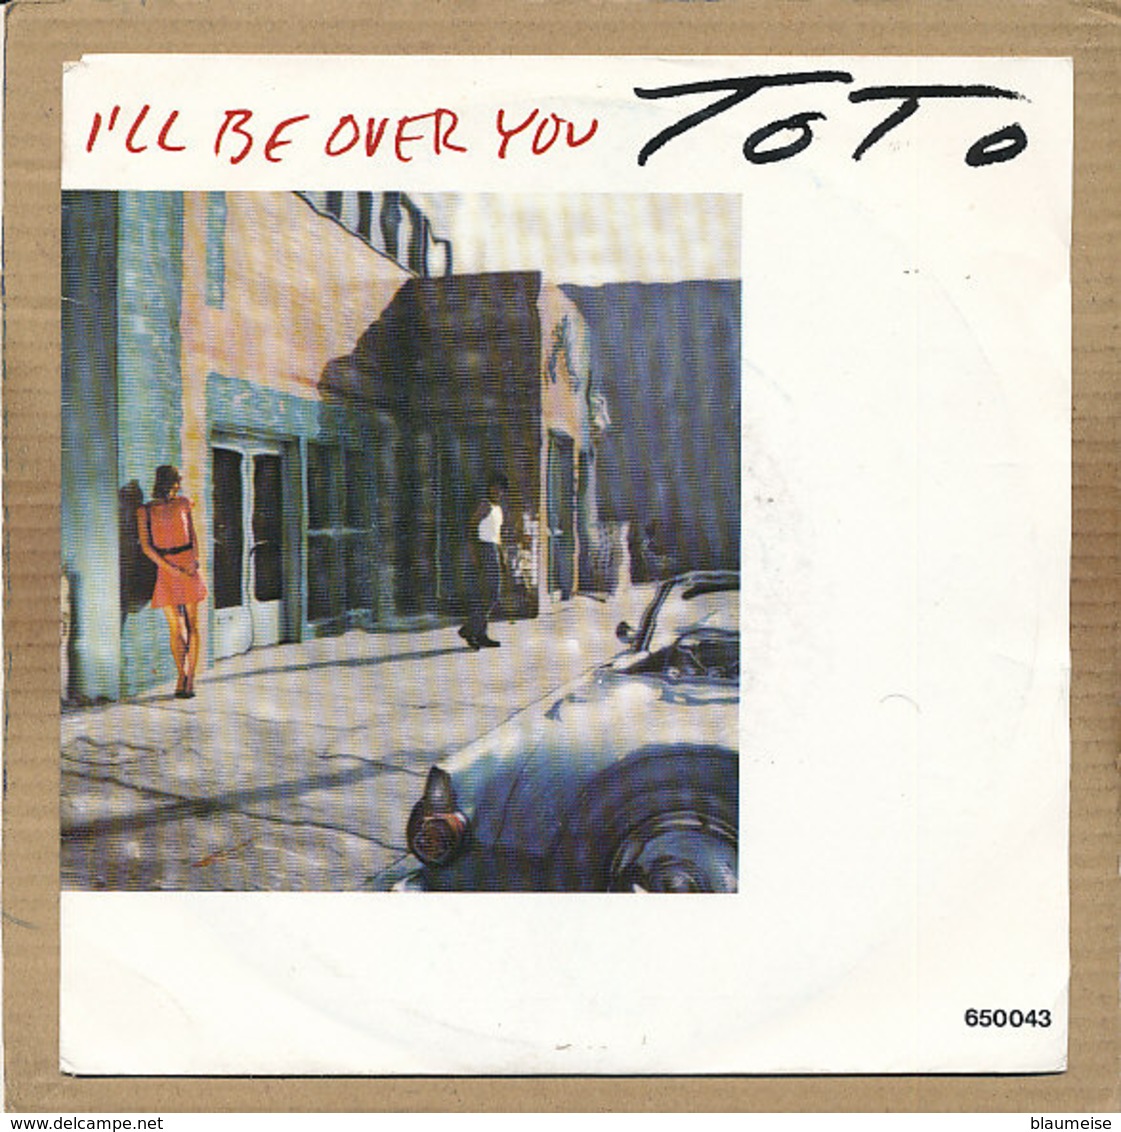 7" Single, Toto - I'll Be Over You - Disco, Pop